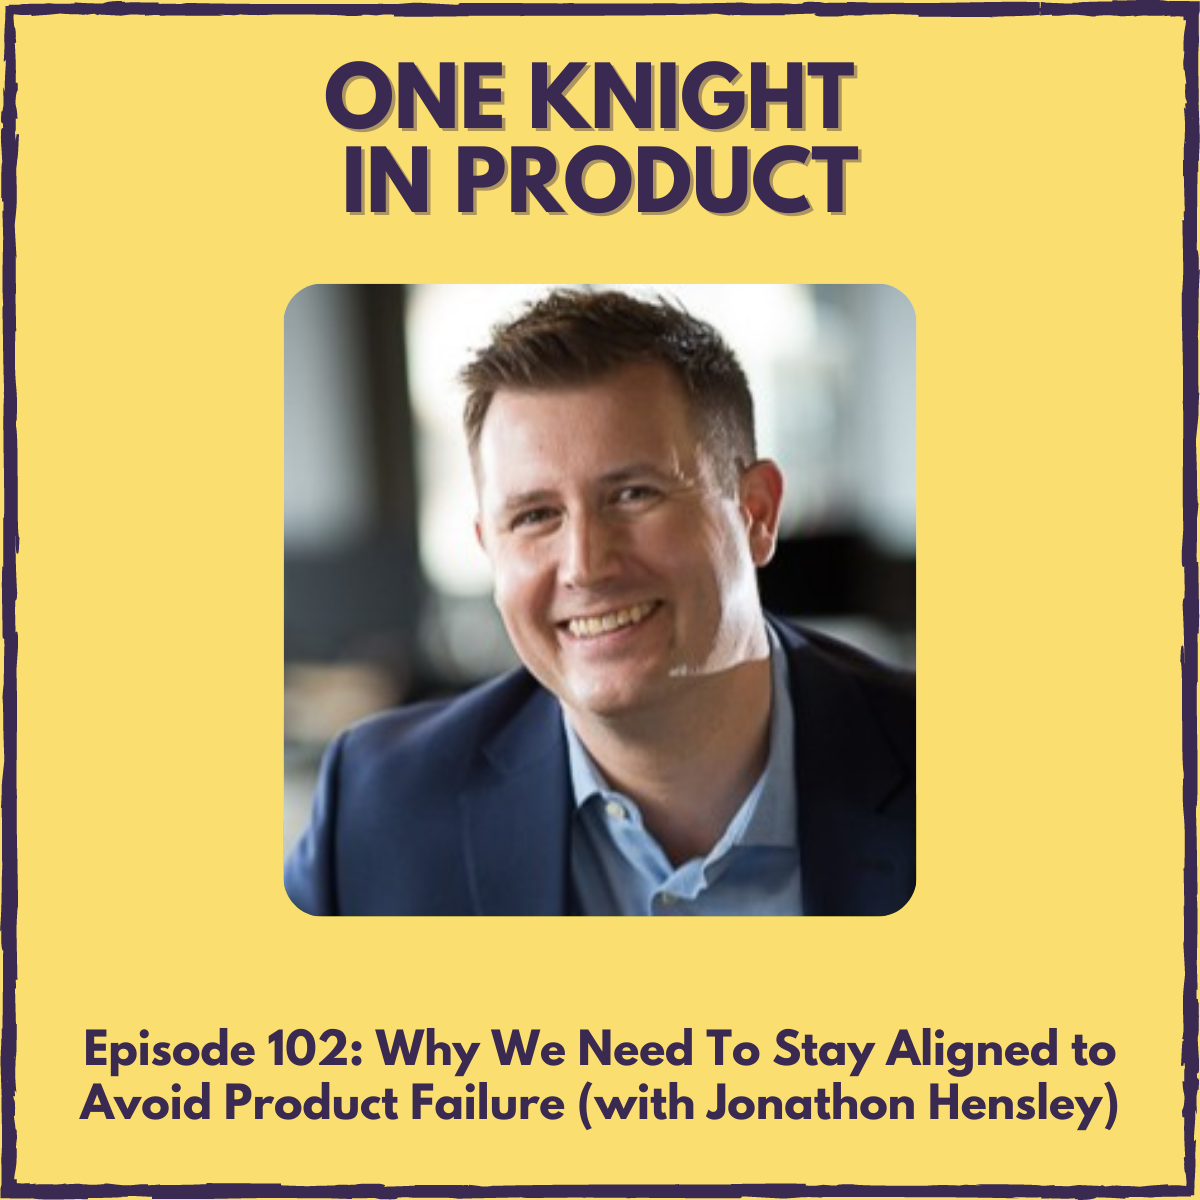 Why We Need To Stay Aligned to Avoid Product Failure (with Jonathon Hensley, author ”Alignment”)